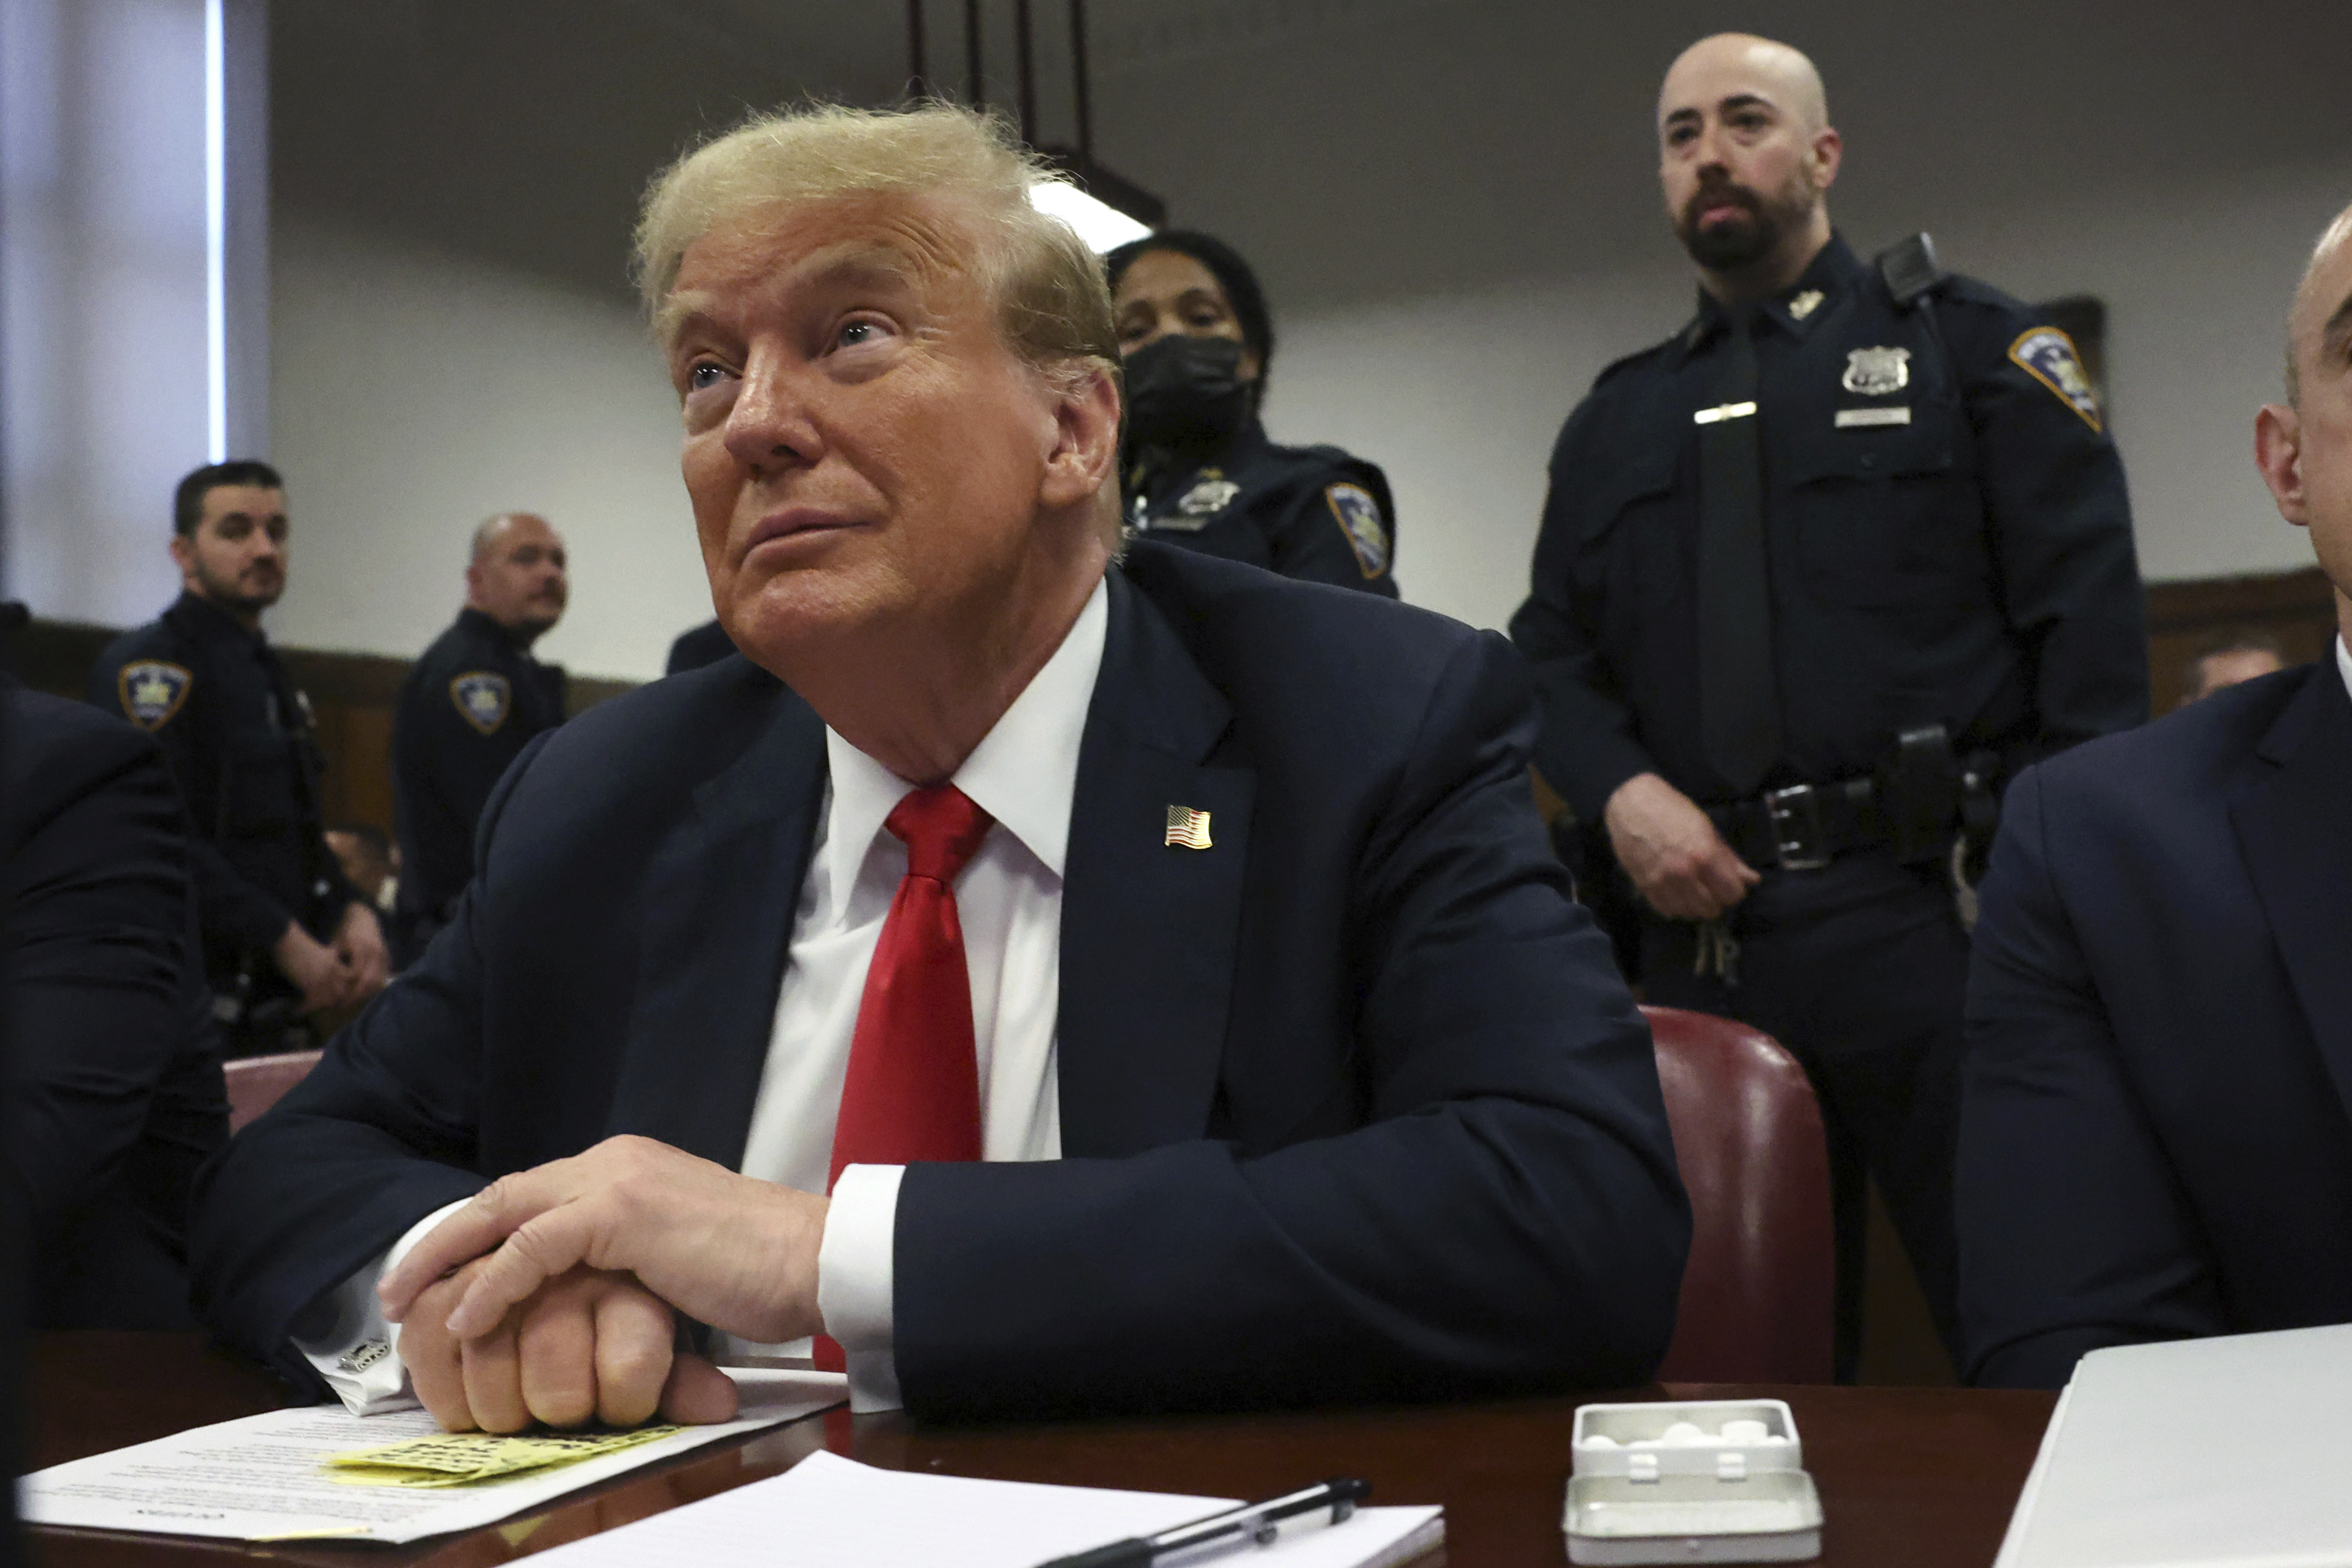 Former U.S. President Donald Trump sits in court.